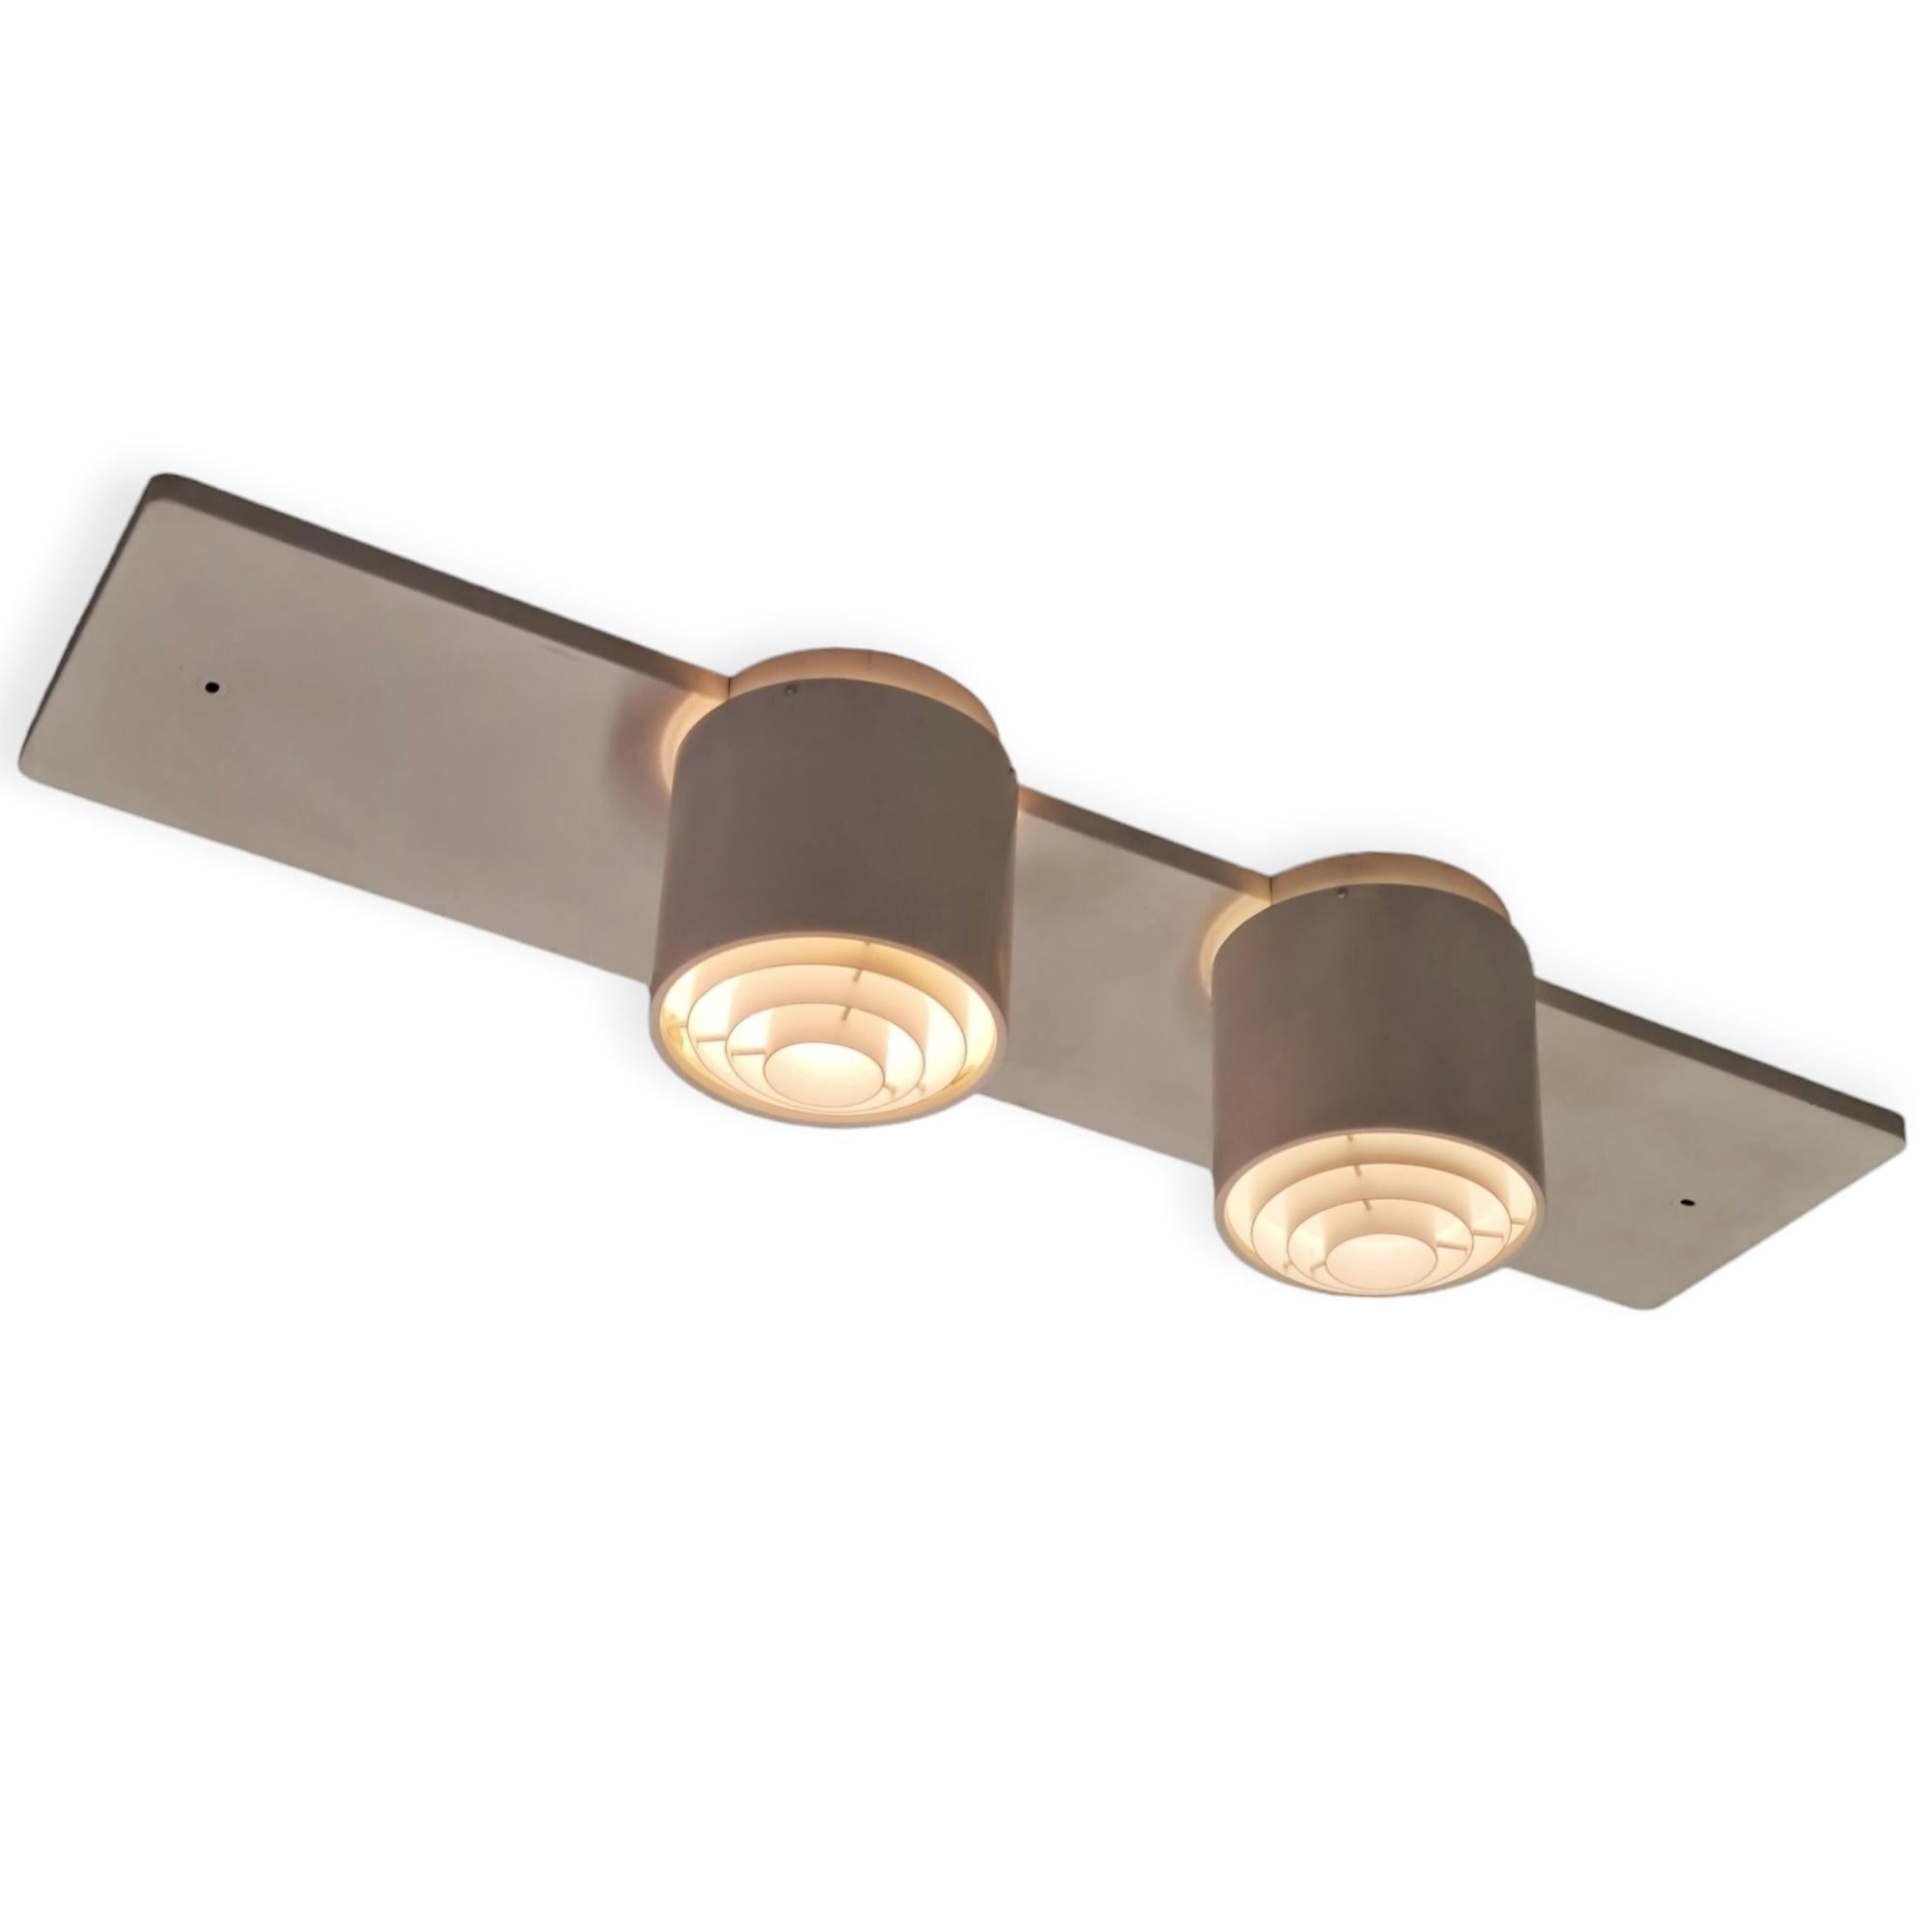 This lamp is perfect for Kitchens, counter tops, window fronts, or as lighting for painting walls. It can even be used on the outside balcony for example.
This ceiling lamp came from the Stora Enso building which is situated right next to the